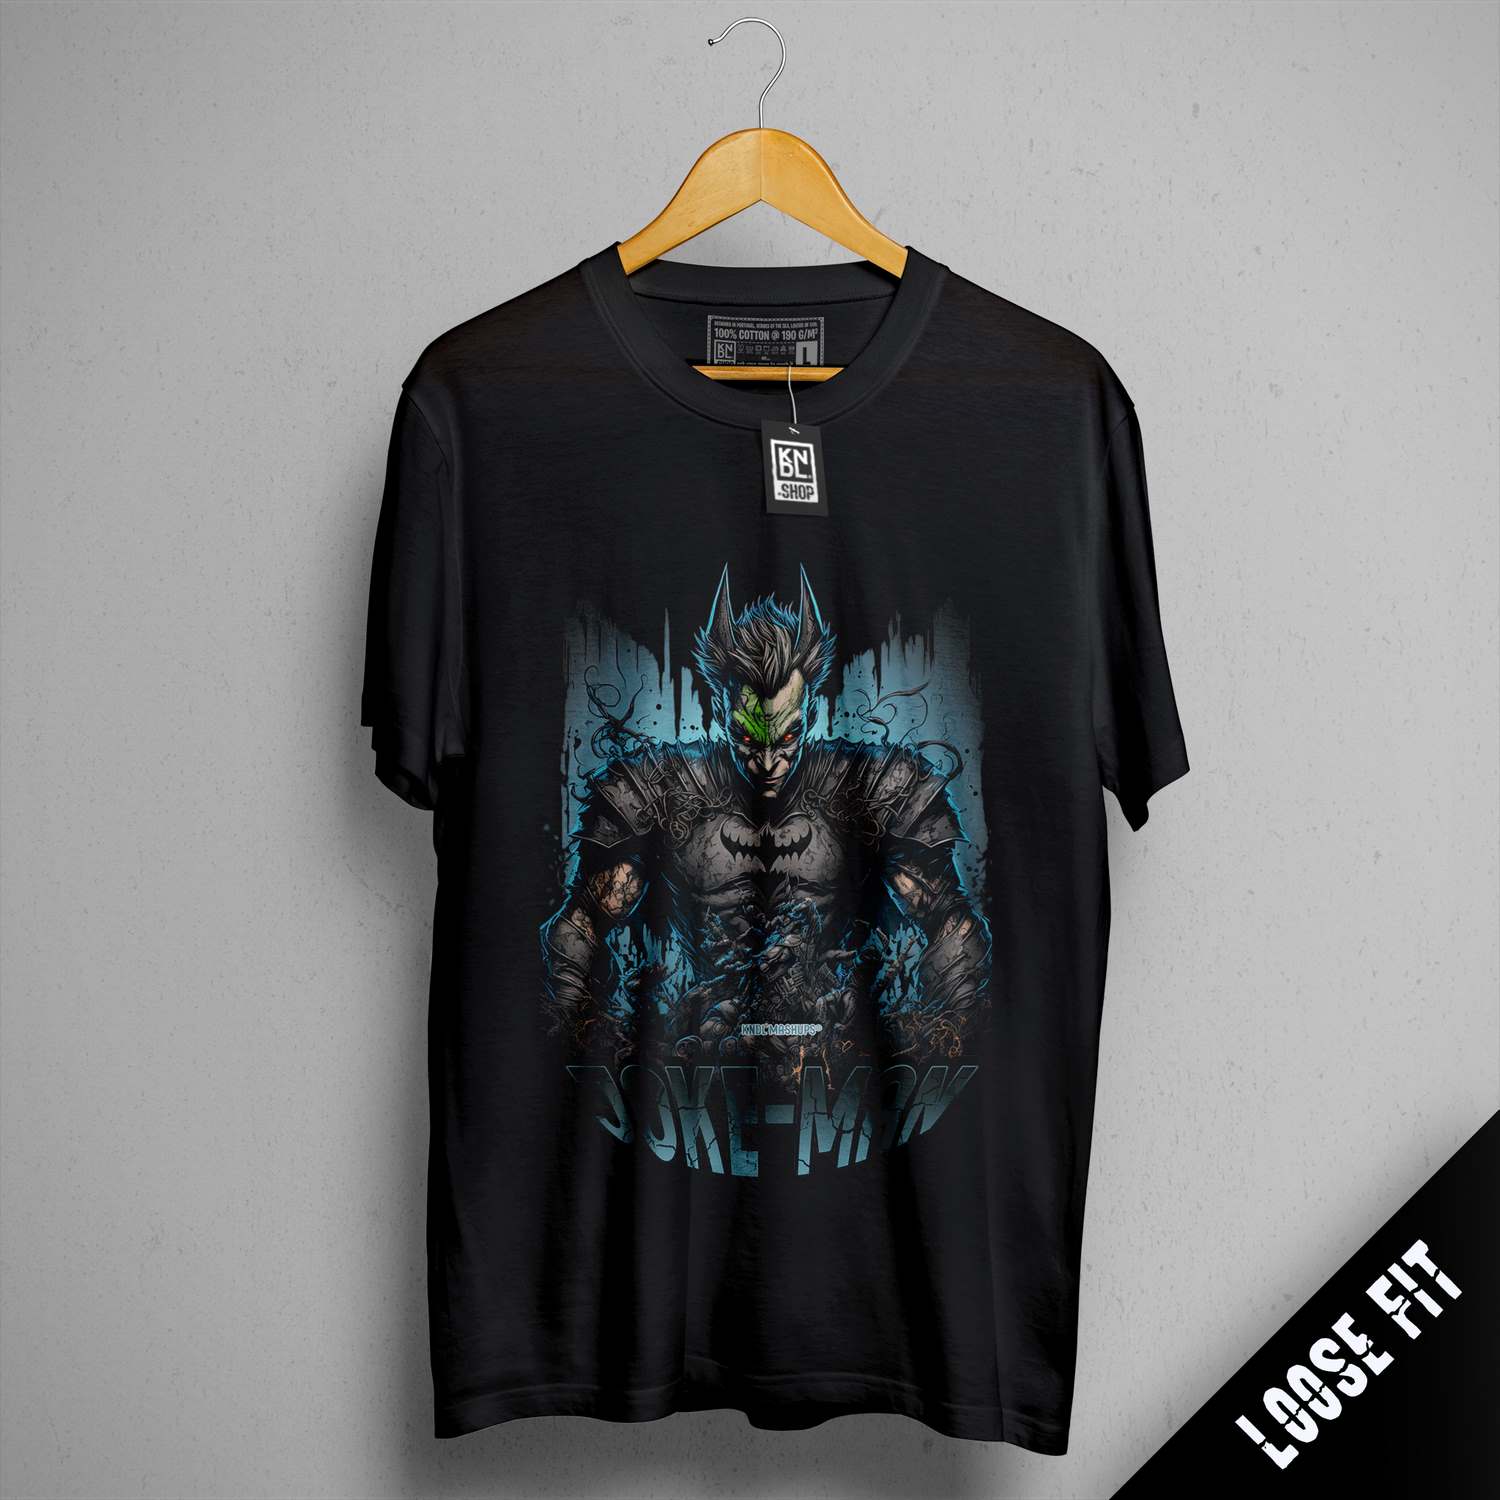 a black t - shirt with a picture of a batman on it